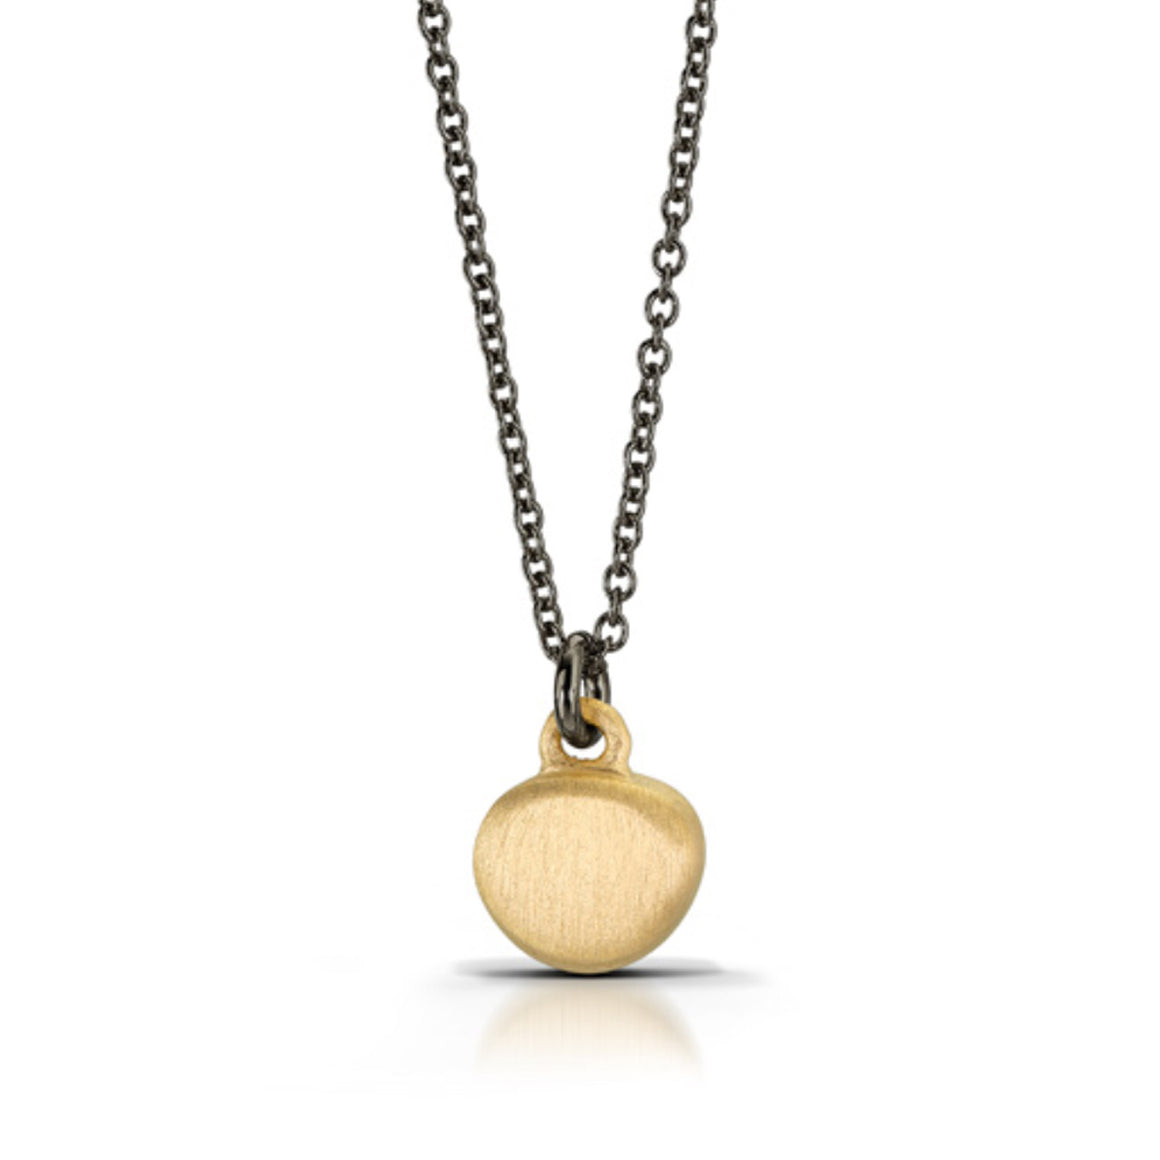 Baby Pebble Pendant in 14k Vermeil Finish and Oxidized Silver Chain